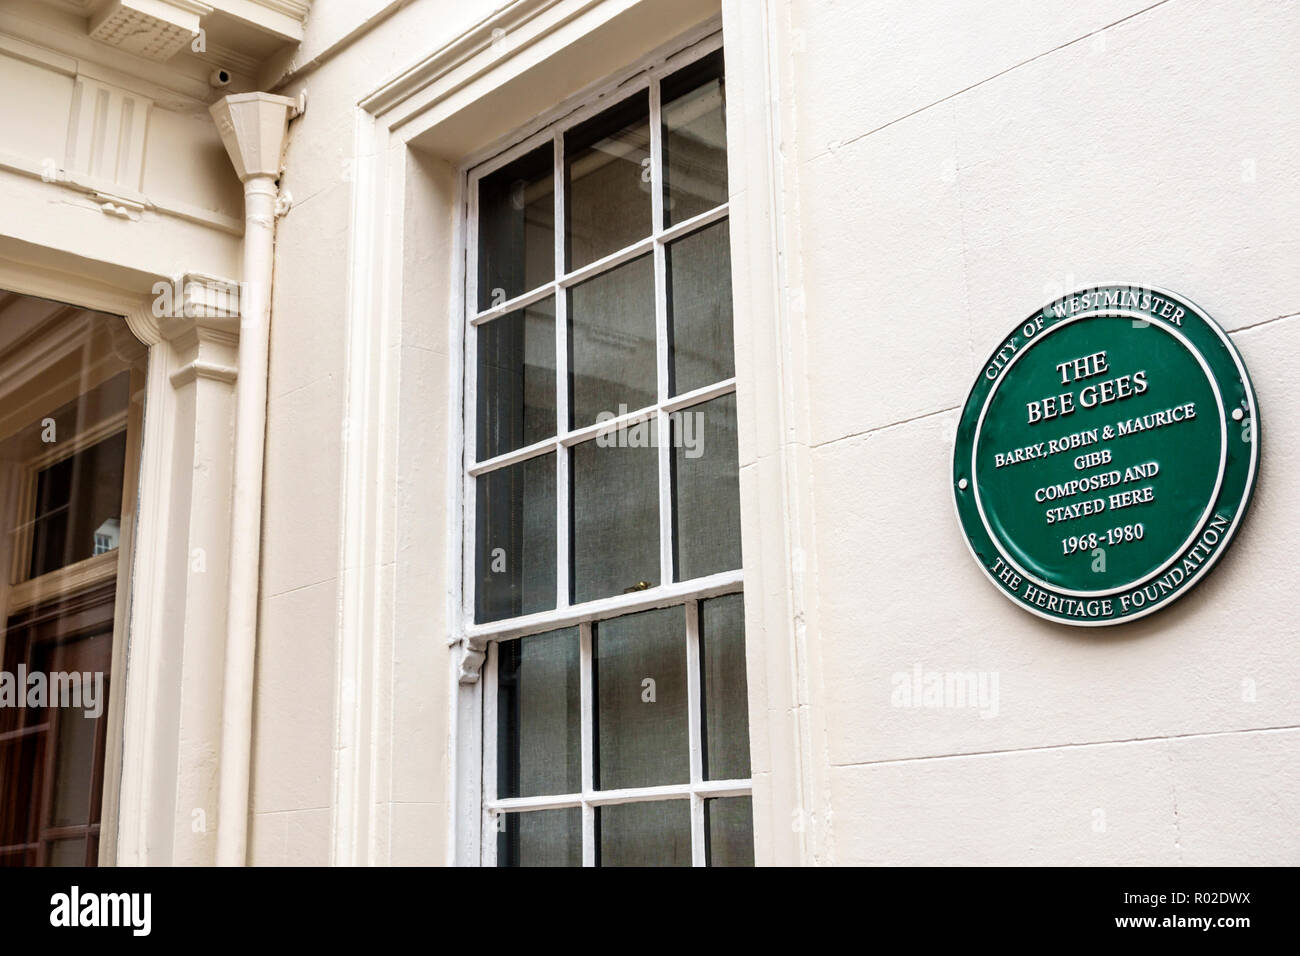 Londres Angleterre,Royaume-Uni,Mayfair,Brook Street,City of Westminster,Heritage Foundation,plaque de marquage historique,Bee Gees,Barry Robin Maurice Gibb,musique pop,mu Banque D'Images